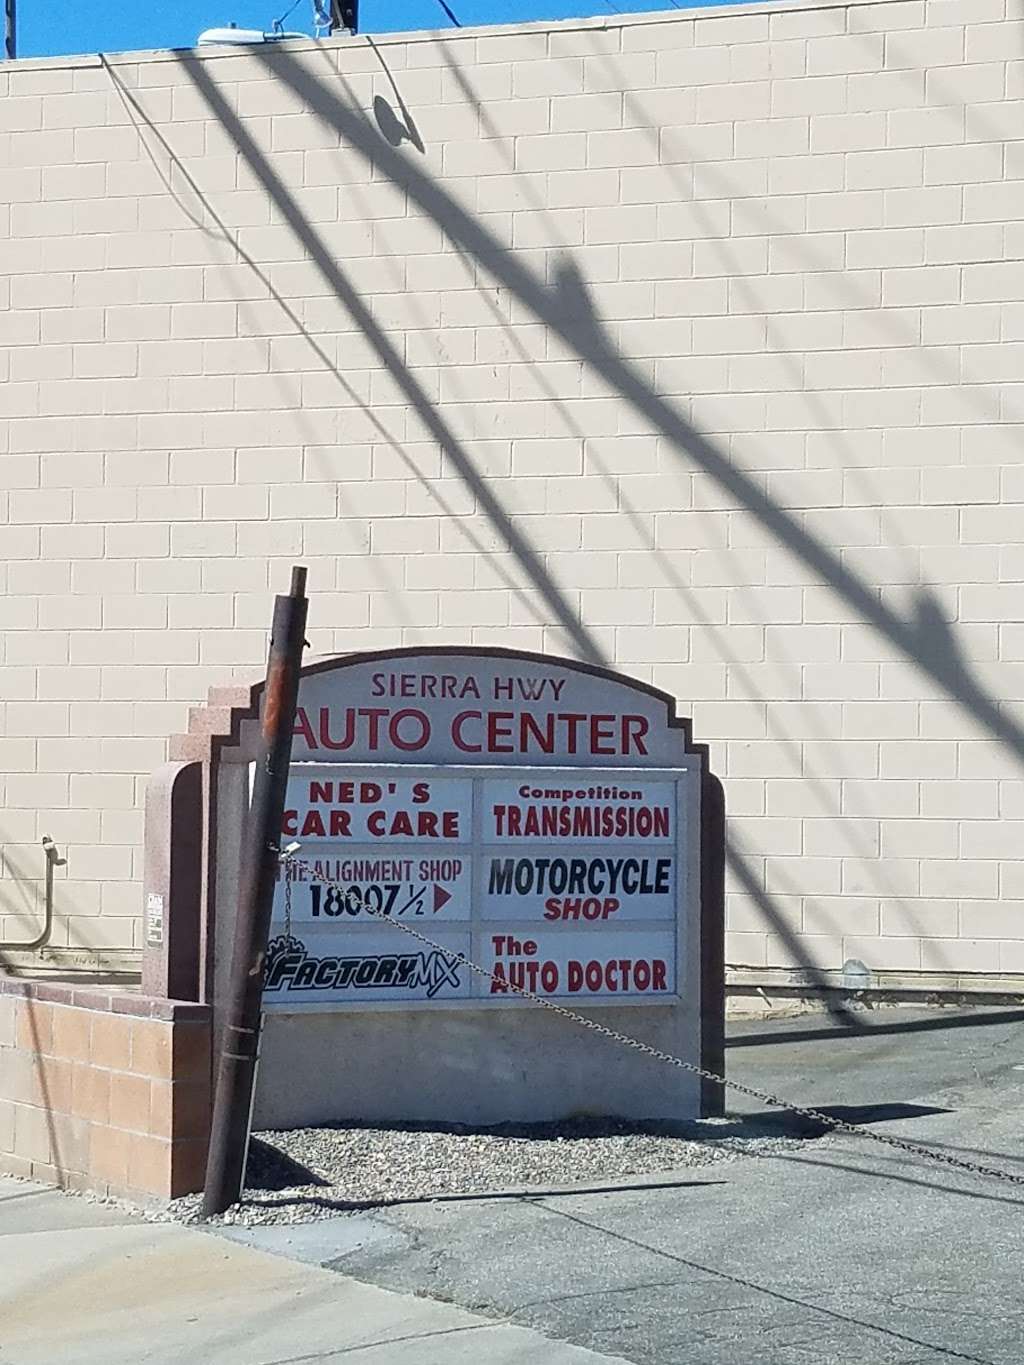 The Alignment Shop & Complete Auto Repair | 18007 1/2 SIERRA HWY, Canyon Country, CA 91351, USA